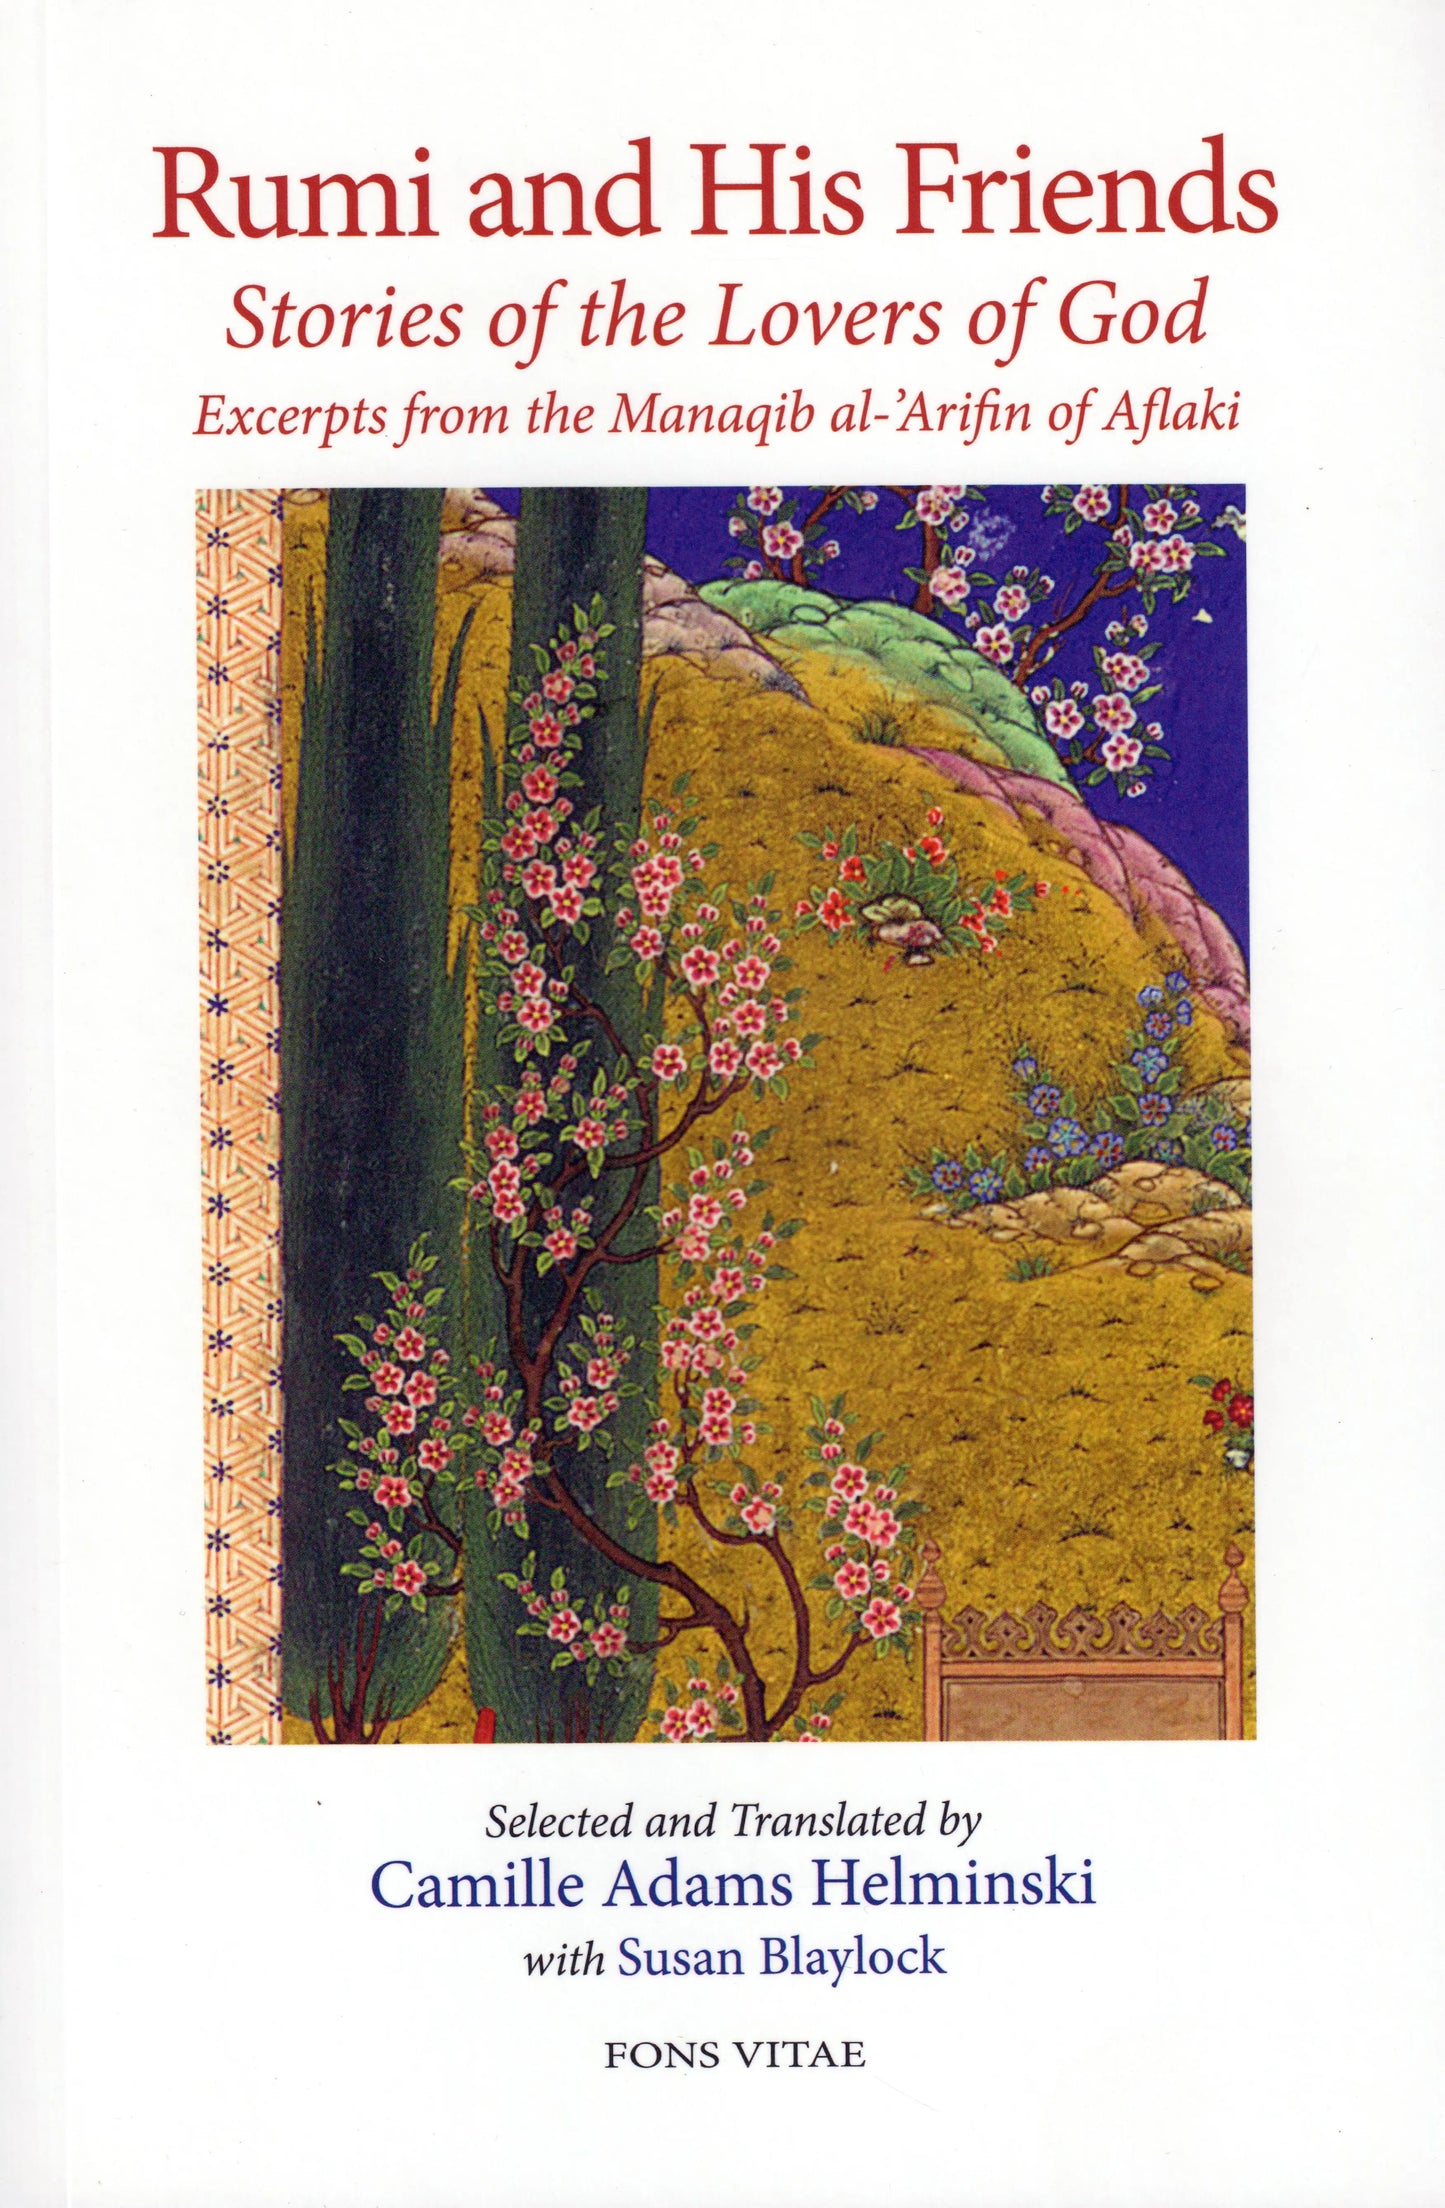 Rumi and His Friends: Stories of the Lovers of God - Excerpts from the Manaqib al-Arifin of Aflaki